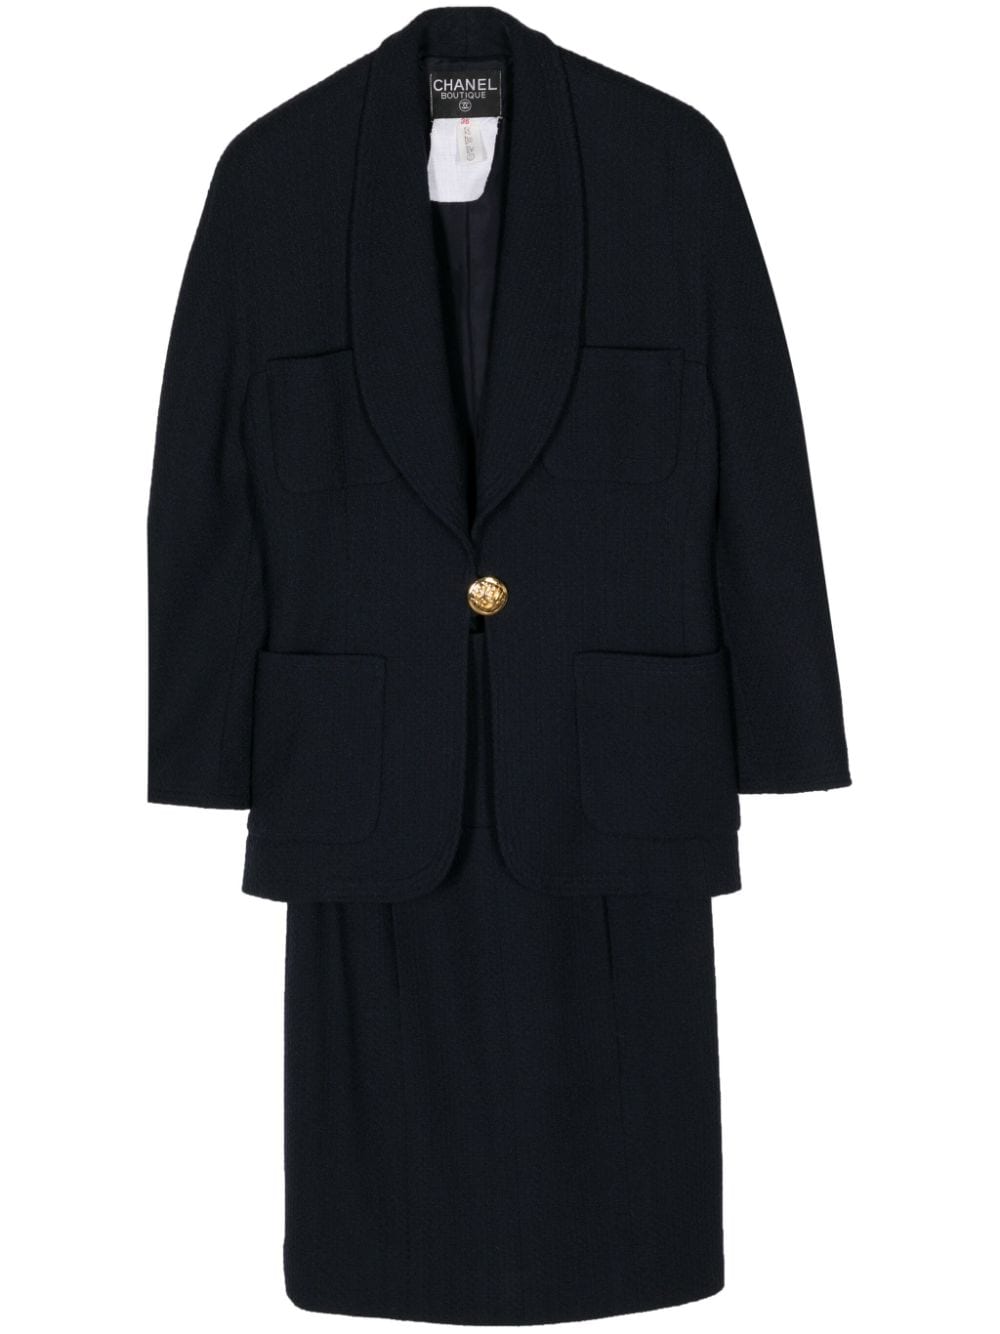 1990s single-breasted wool skirt suit